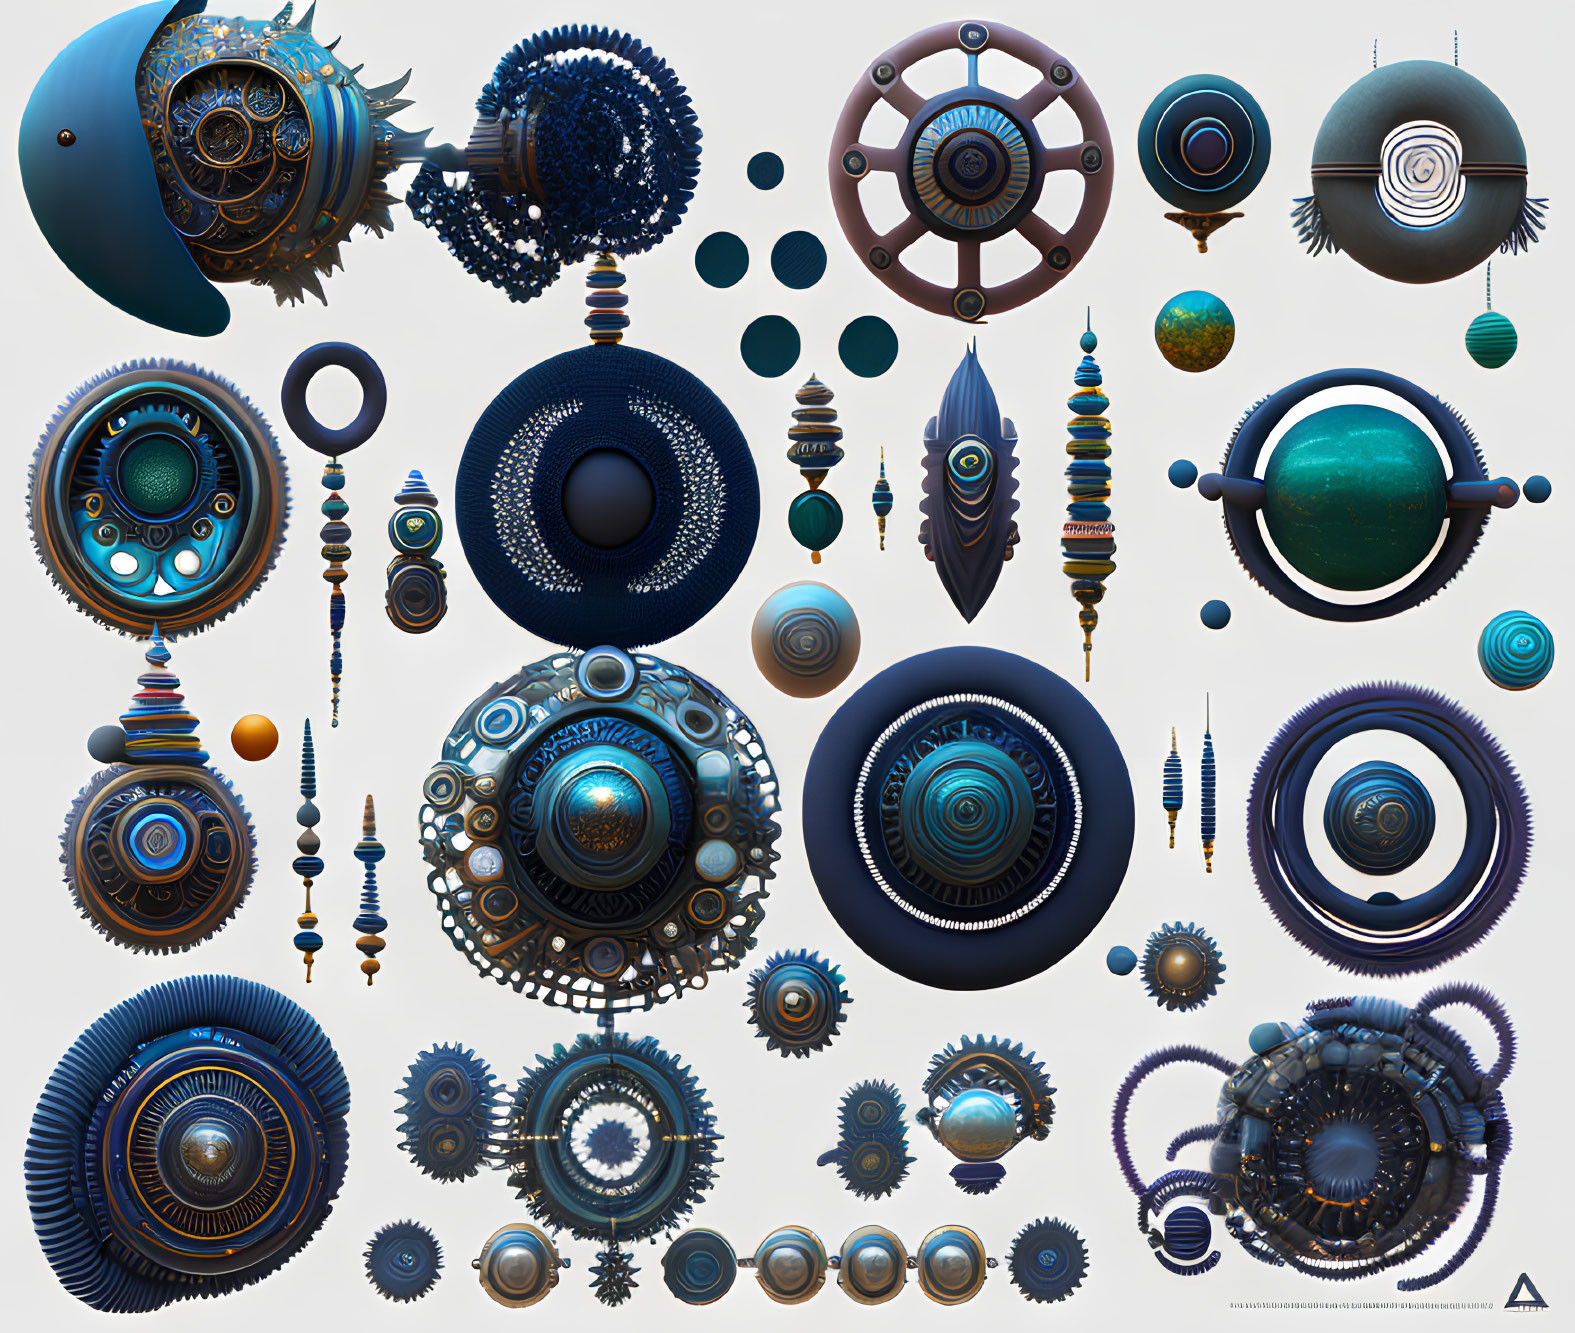 Colorful Steampunk Mechanical Designs on Gray Background